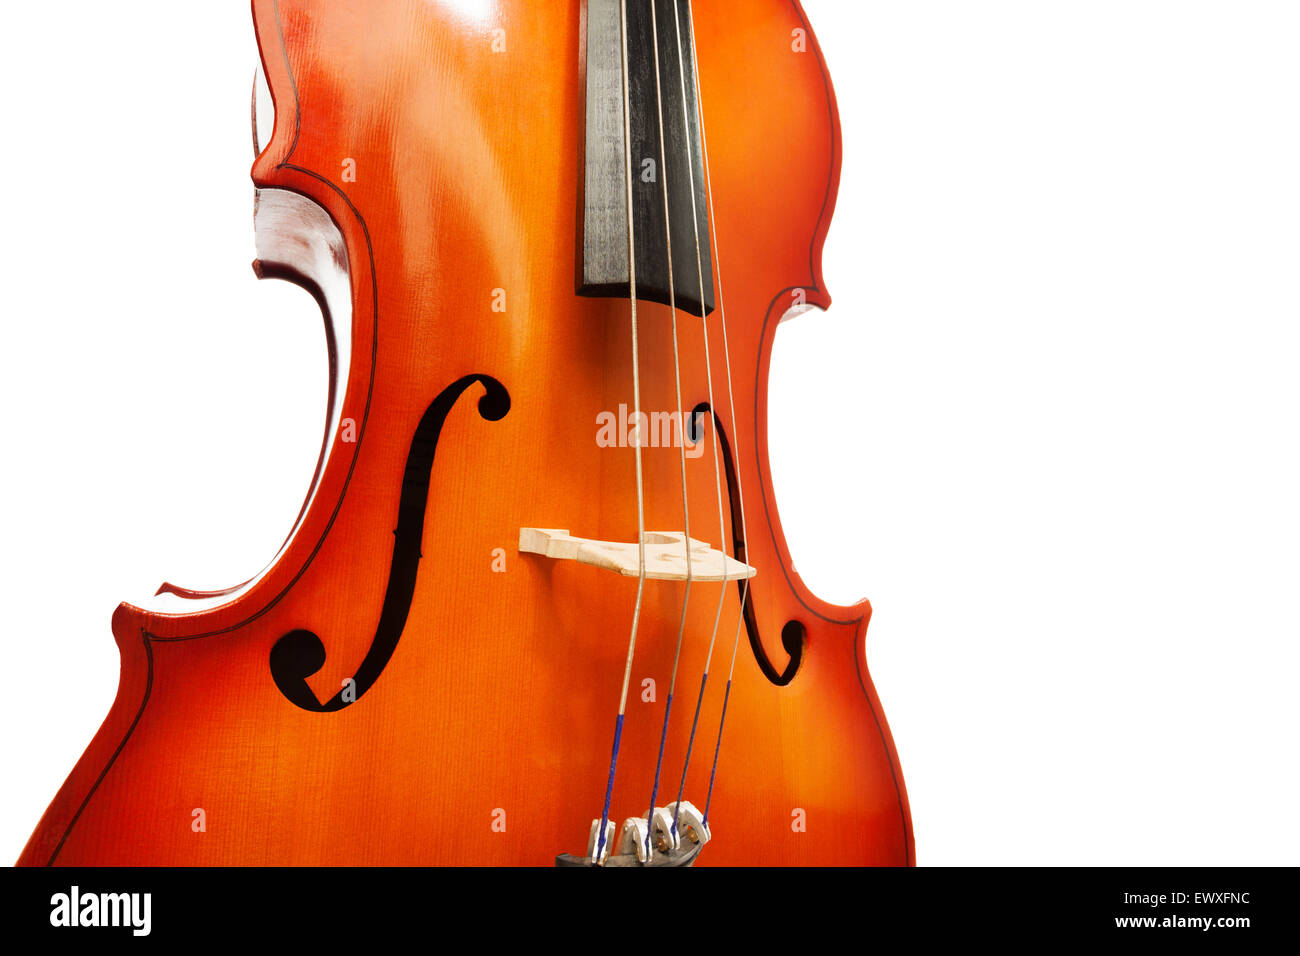 Violoncello fragment with bridge, body and F-hole Stock Photo